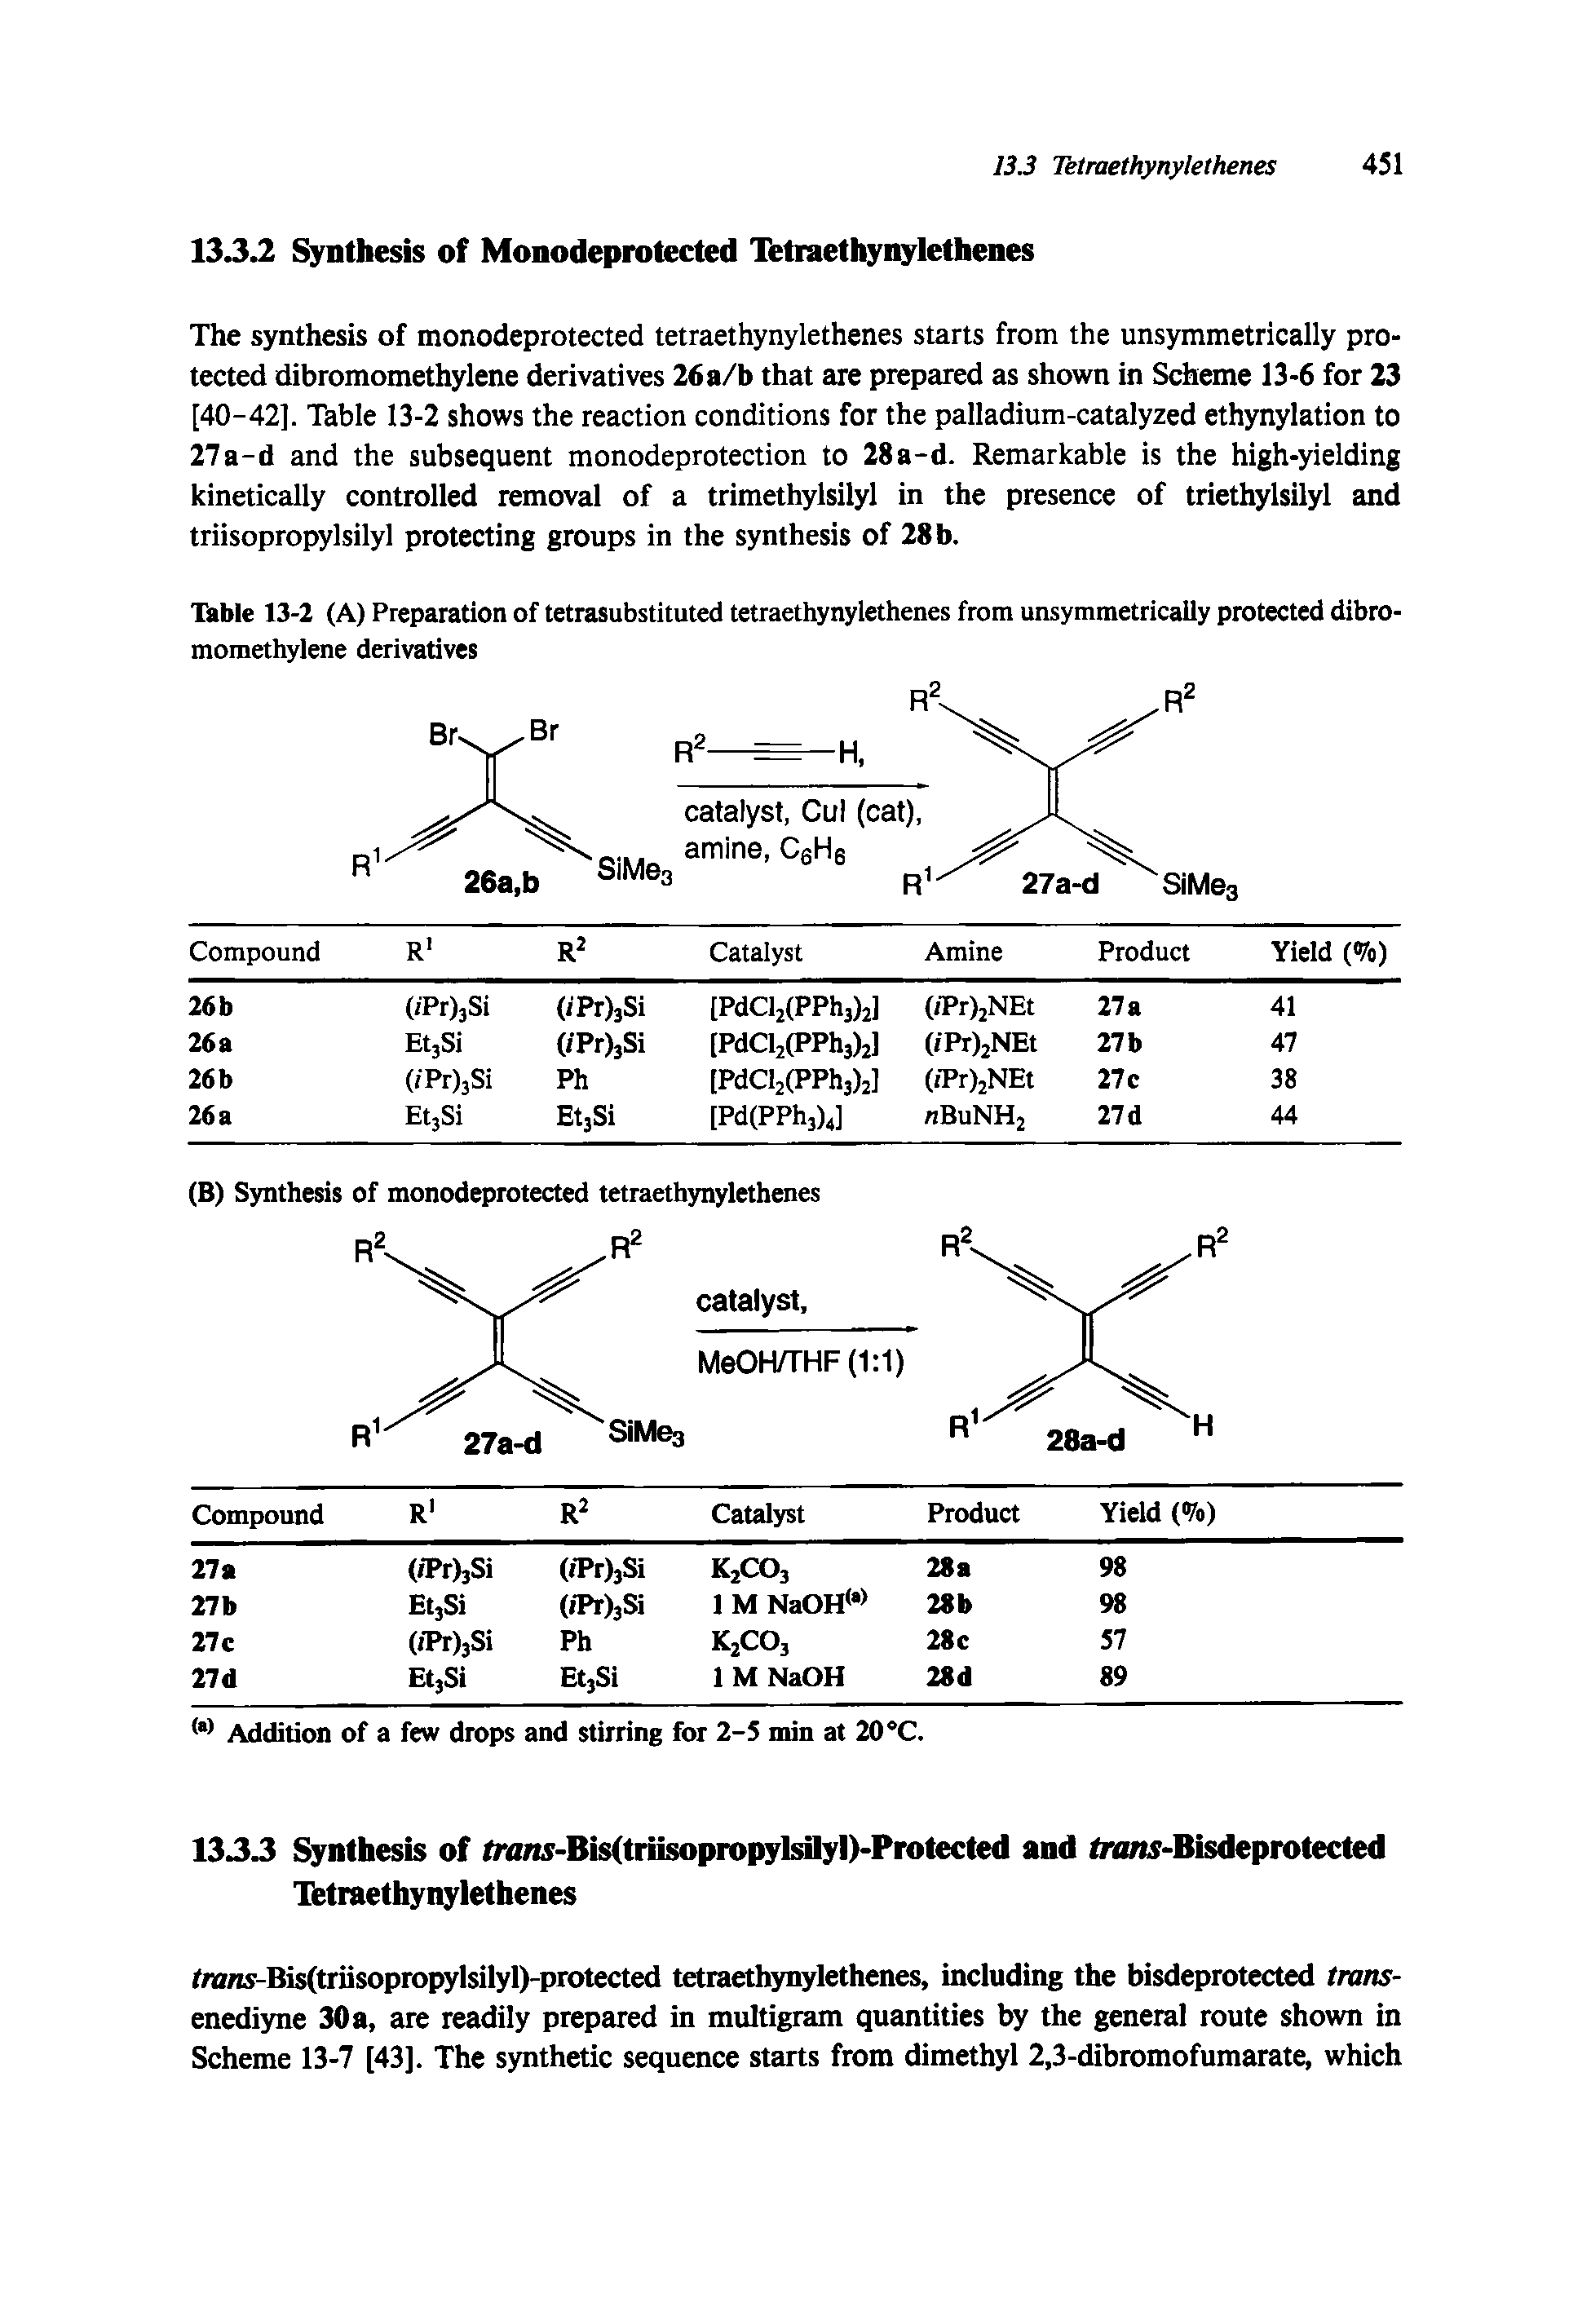 Table 13-2 (A) Preparation of tetrasubstituted tetraethynylethenes from unsymmetrically protected dibromomethylene derivatives...